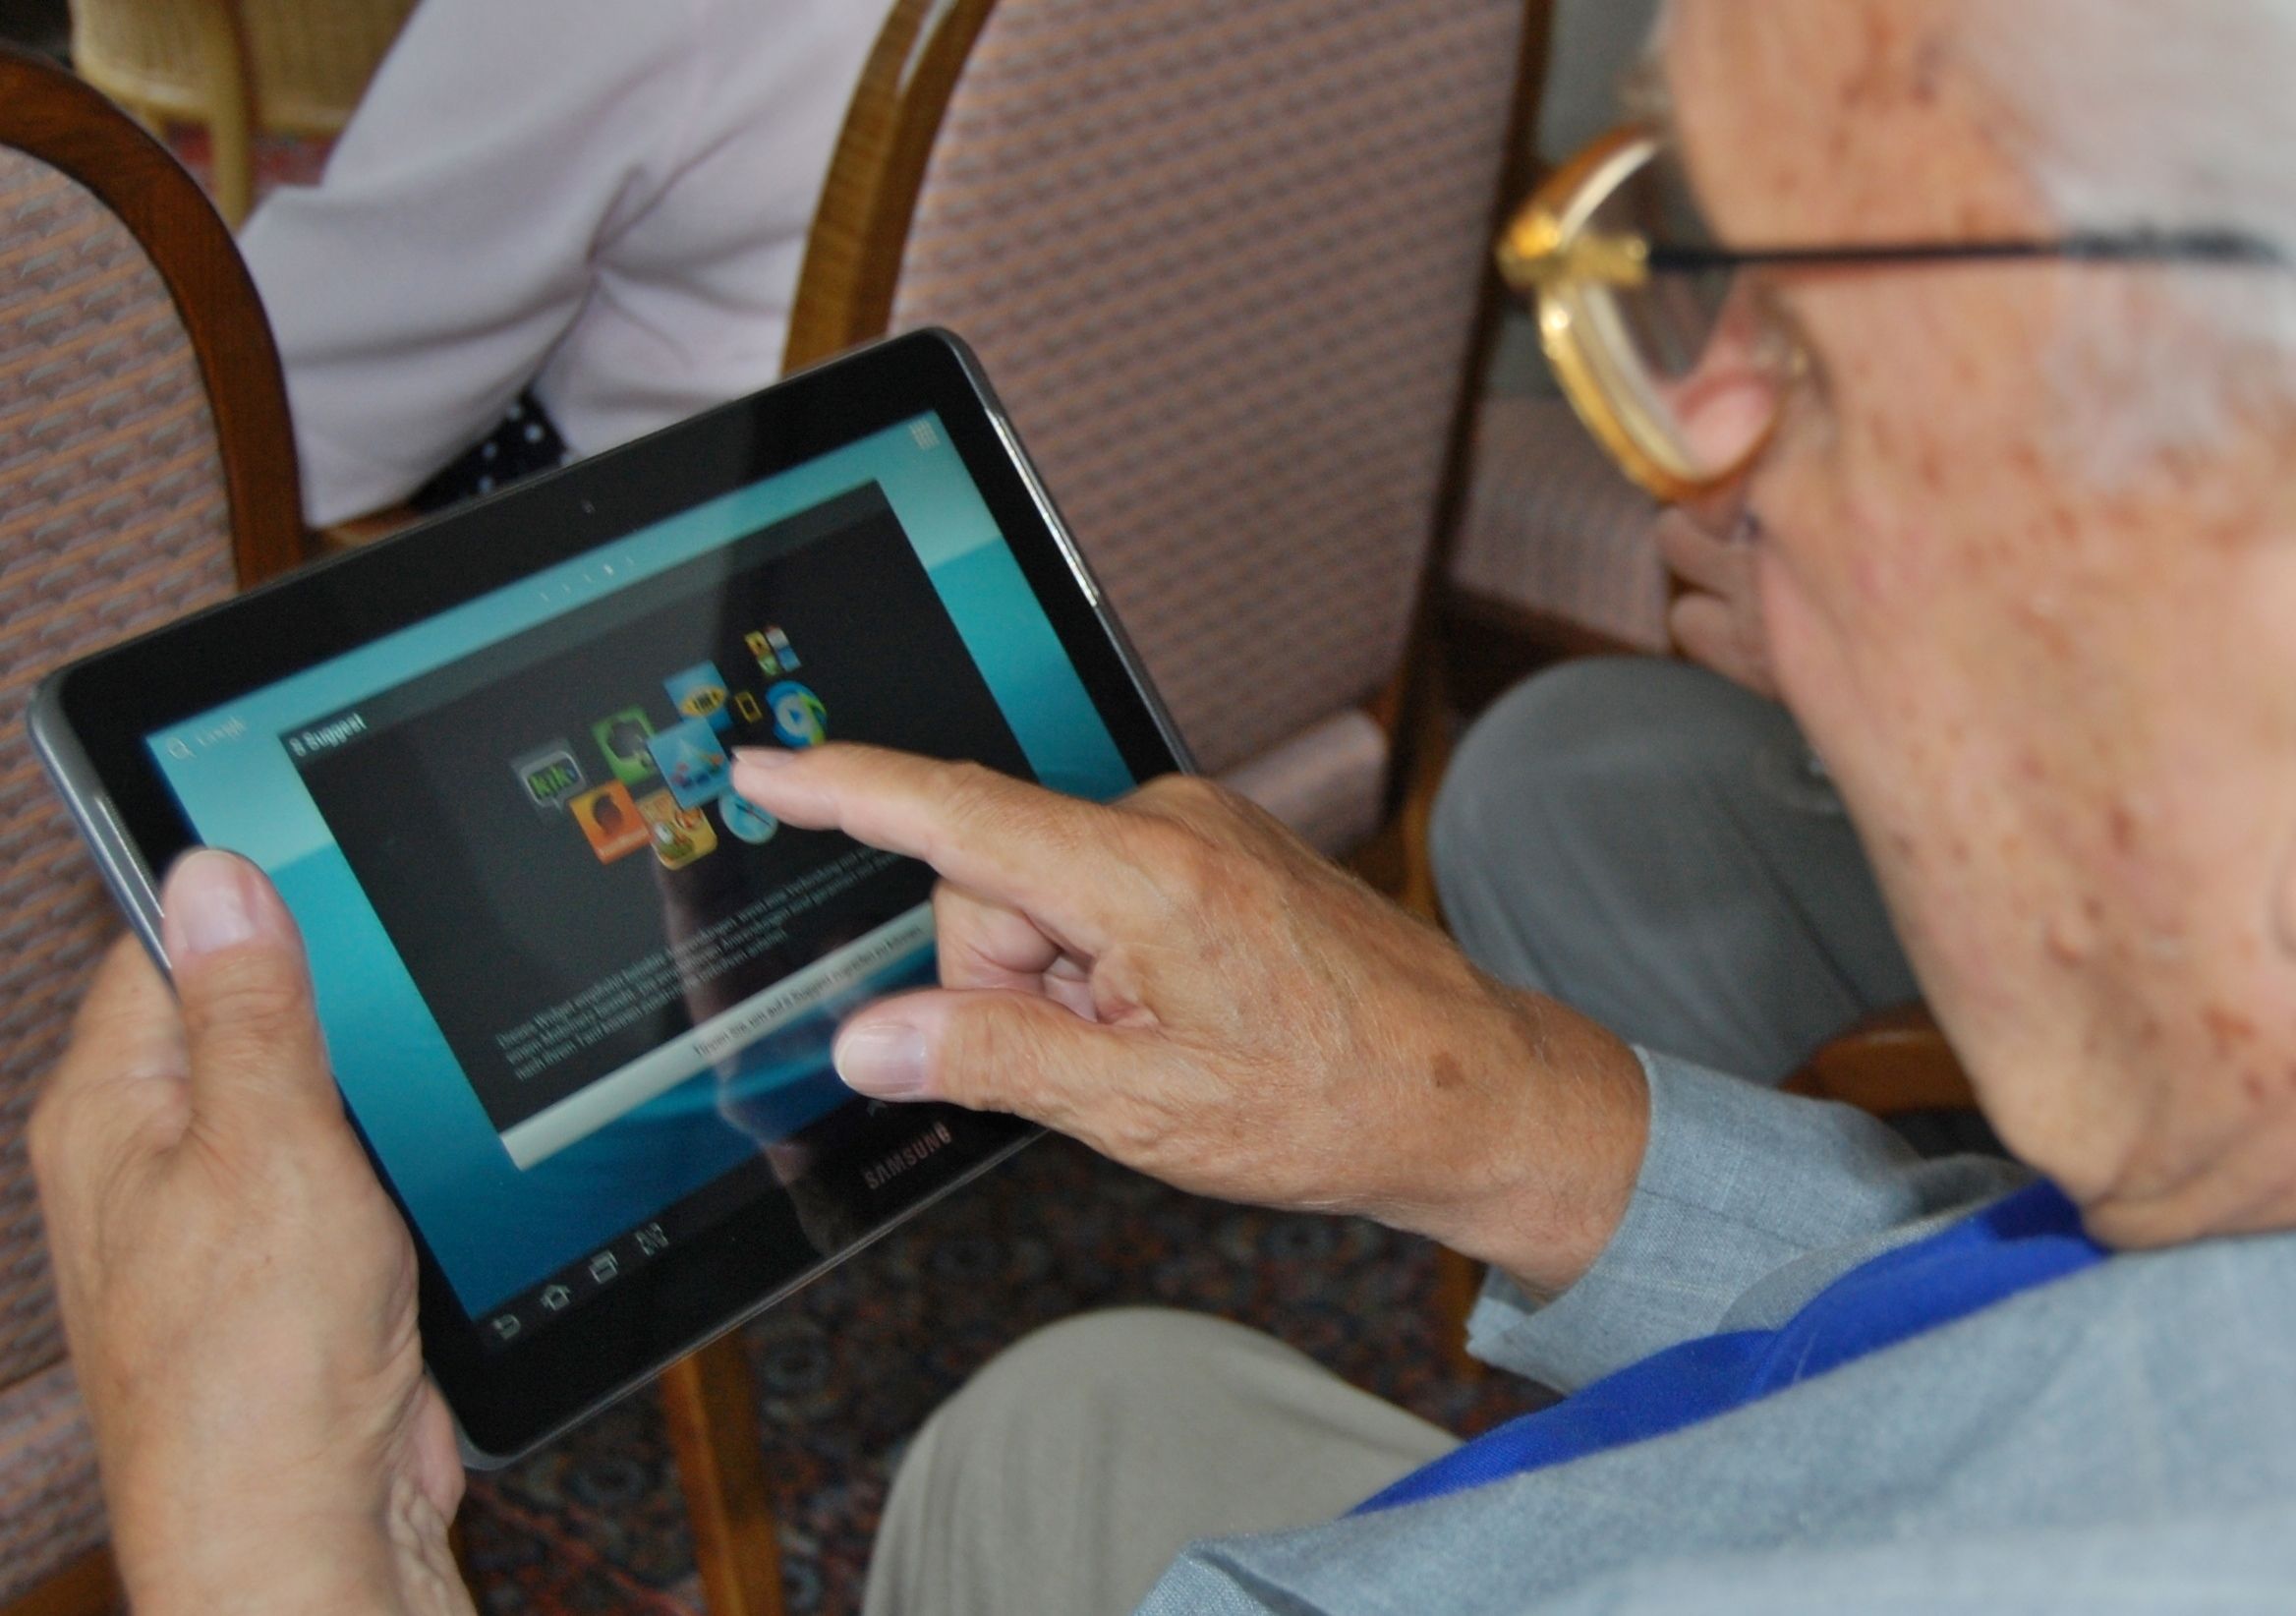 Denmark is number one for internet use among the elderly in the EU